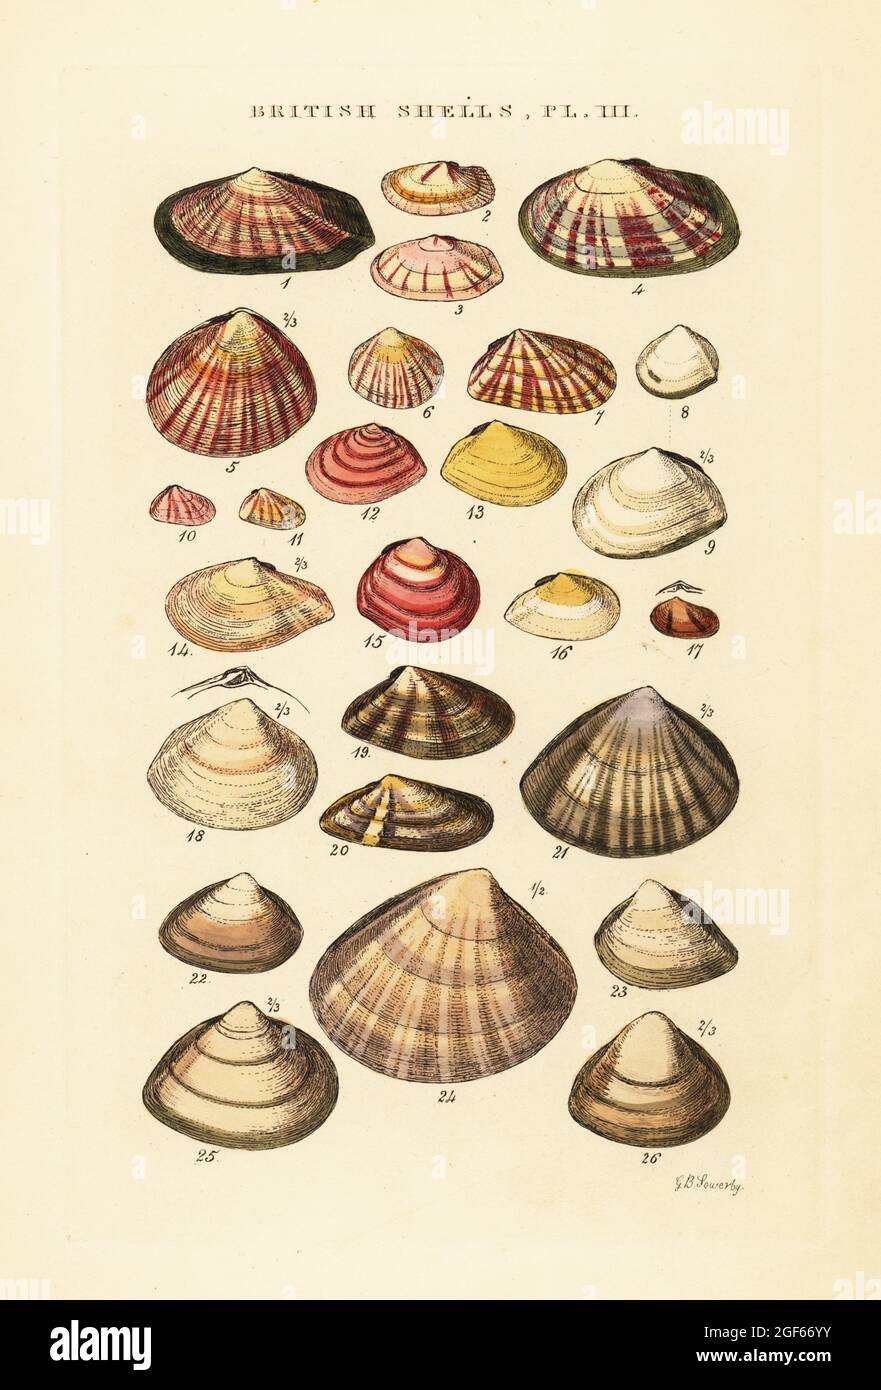 Tellin shells, Tellina crassa, Psammobia, Ervillia, Donax, Mactra., etc. Handcoloured copperplate engraving by George Brettingham Sowerby from his own Illustrated Index of British Shells, Sowerby and Simpkin, Marshall & Co., London, 1859. George Brettingham Sowerby II (1812-1884), British naturalist, illustrator, and conchologist. Stock Photo